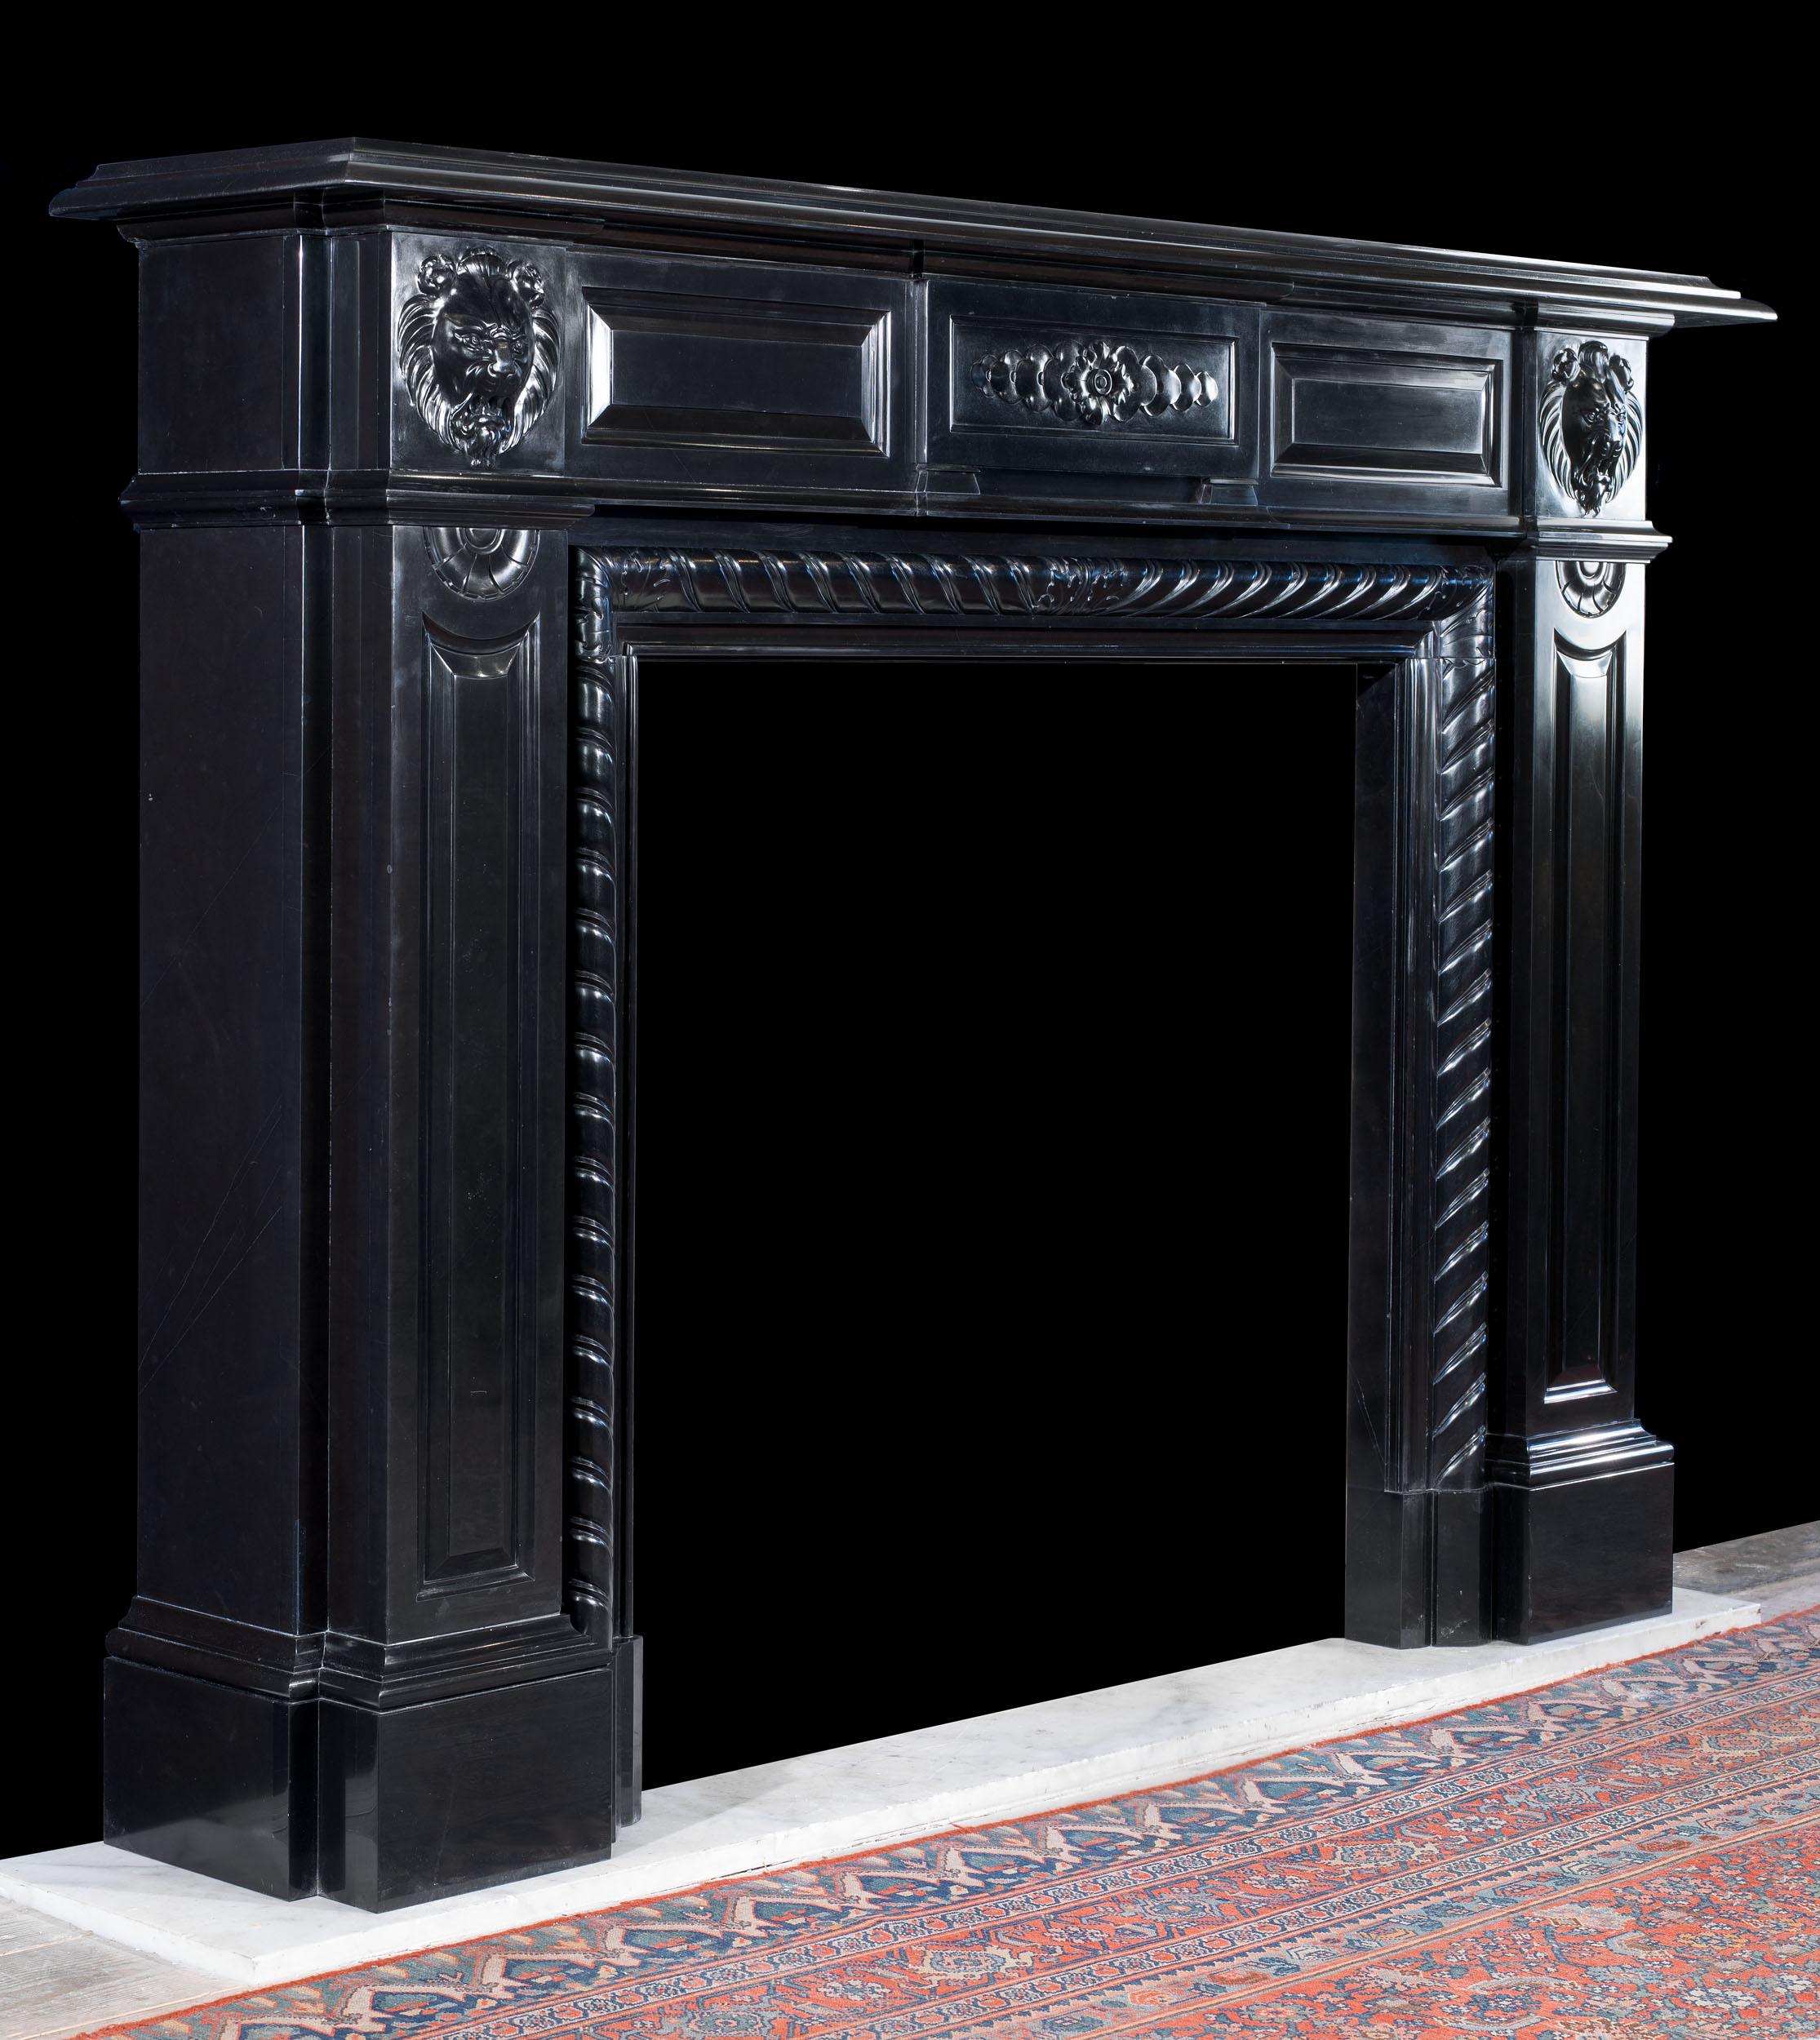 An imposing and striking large fireplace in highly polished Belgian Black Marble. The wide and deep moulded shelf sits above a panelled frieze with a crisply carved central tablet, which is flanked by two lion mask endblocks over wide panelled jambs